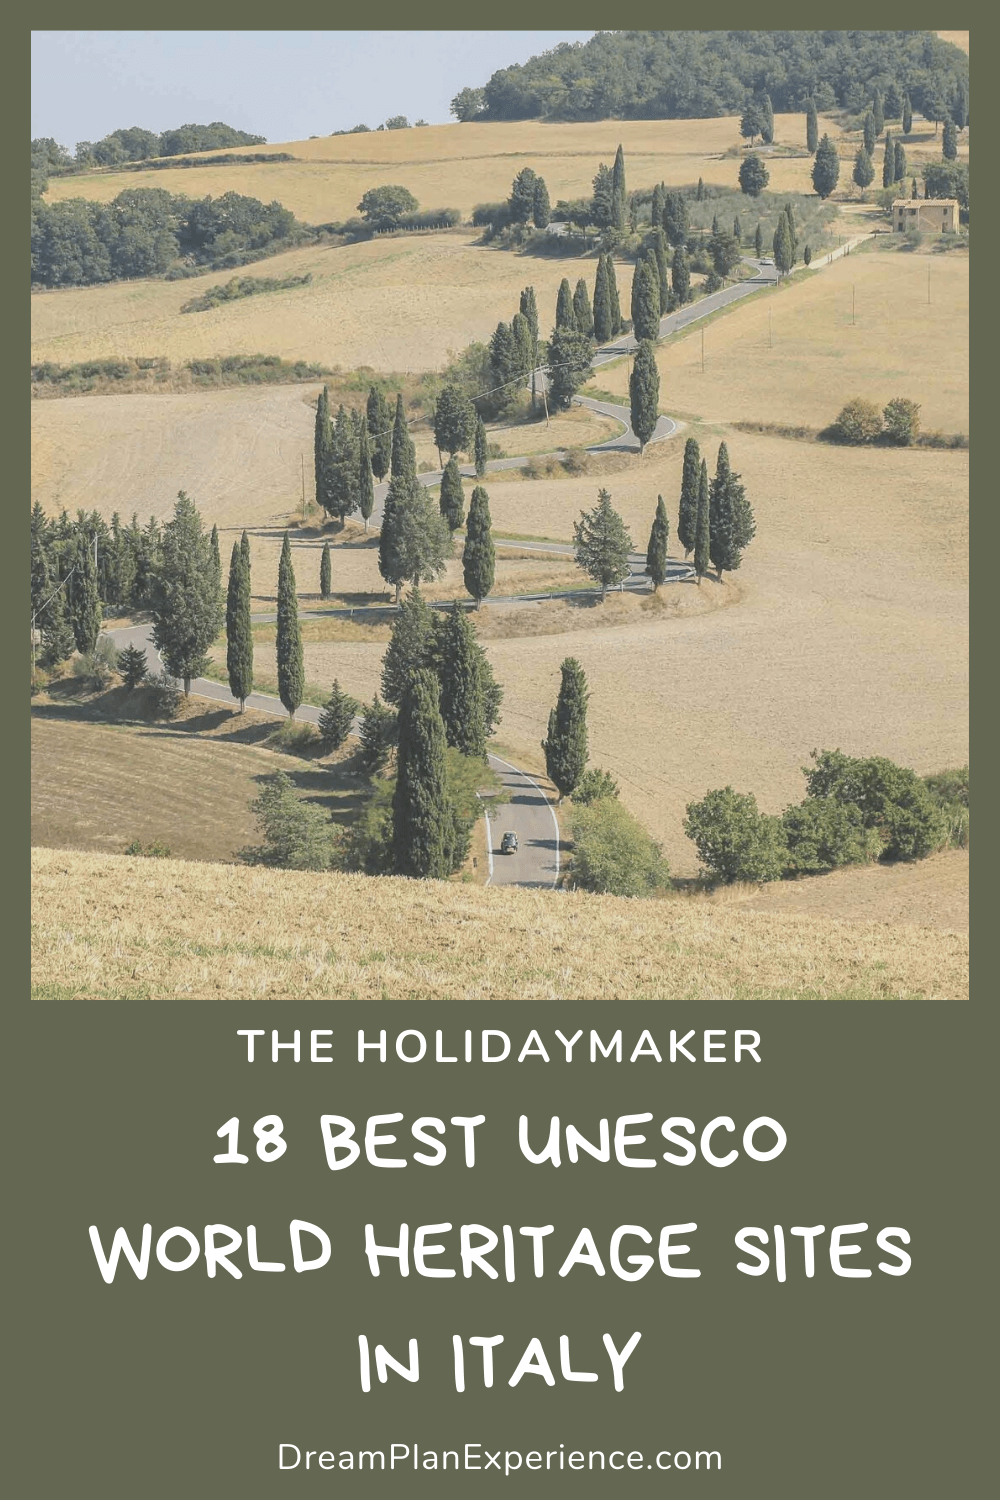 Check out the 18 Best UNESCO World Heritage Sites in Italy